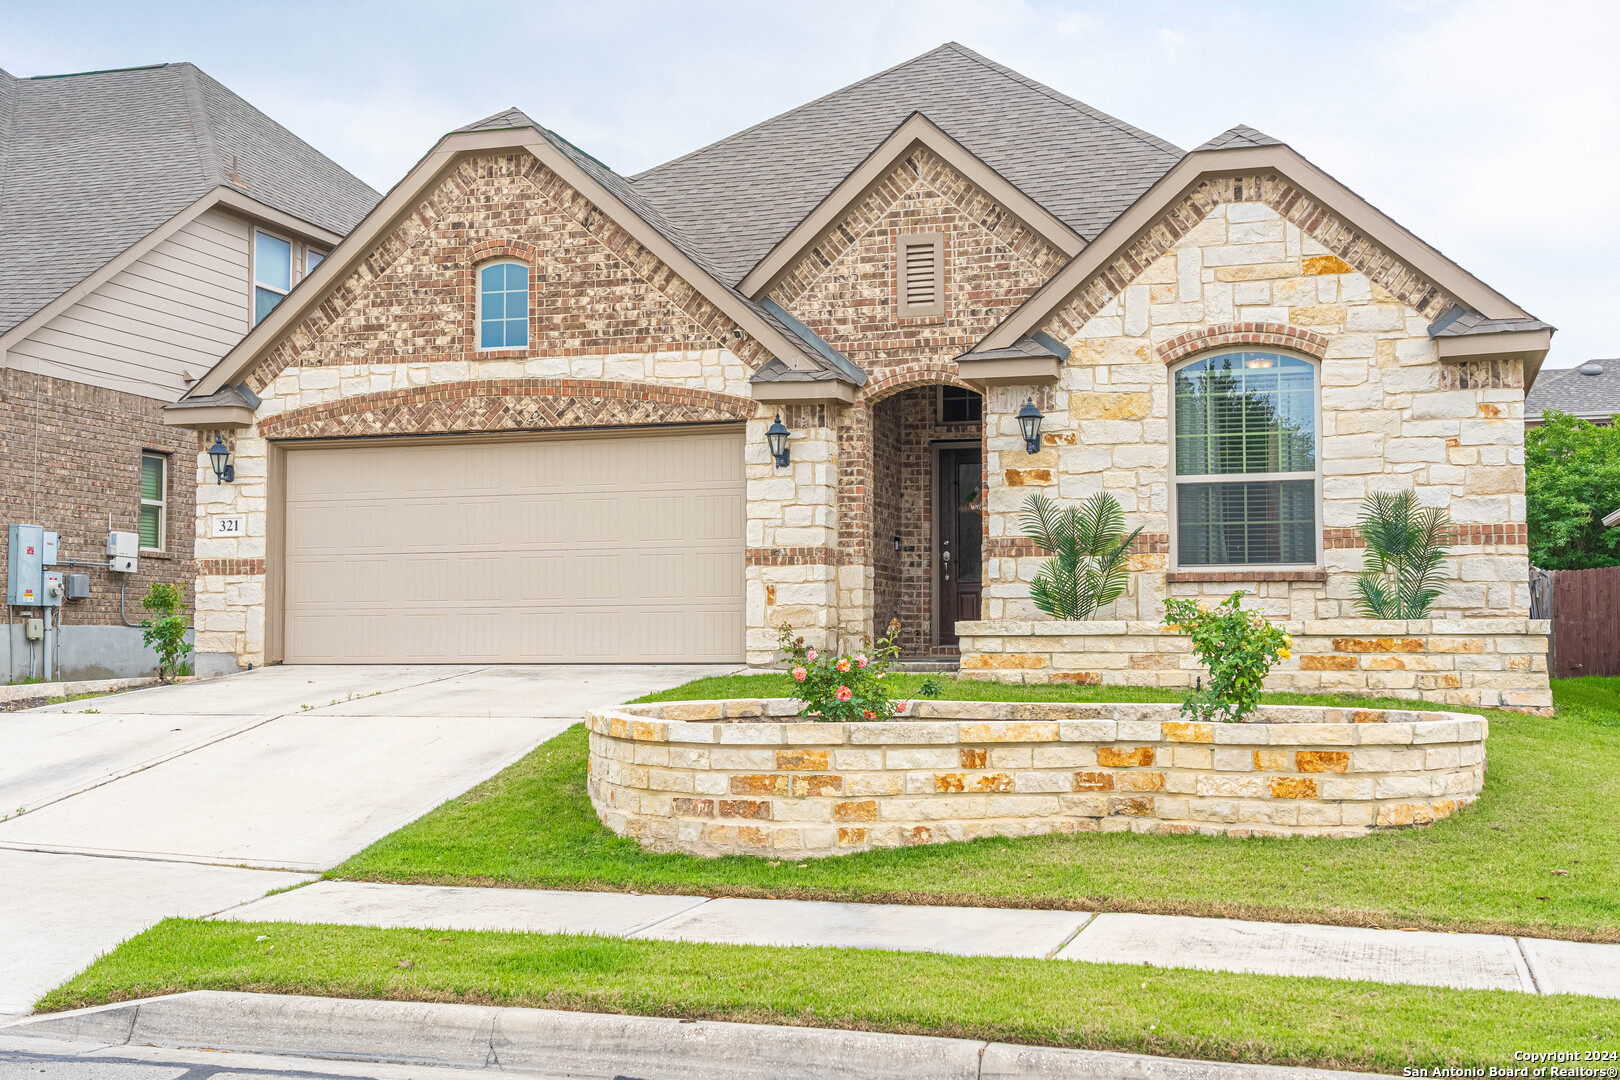 Photo of 321 Norwood Ct in Cibolo, TX